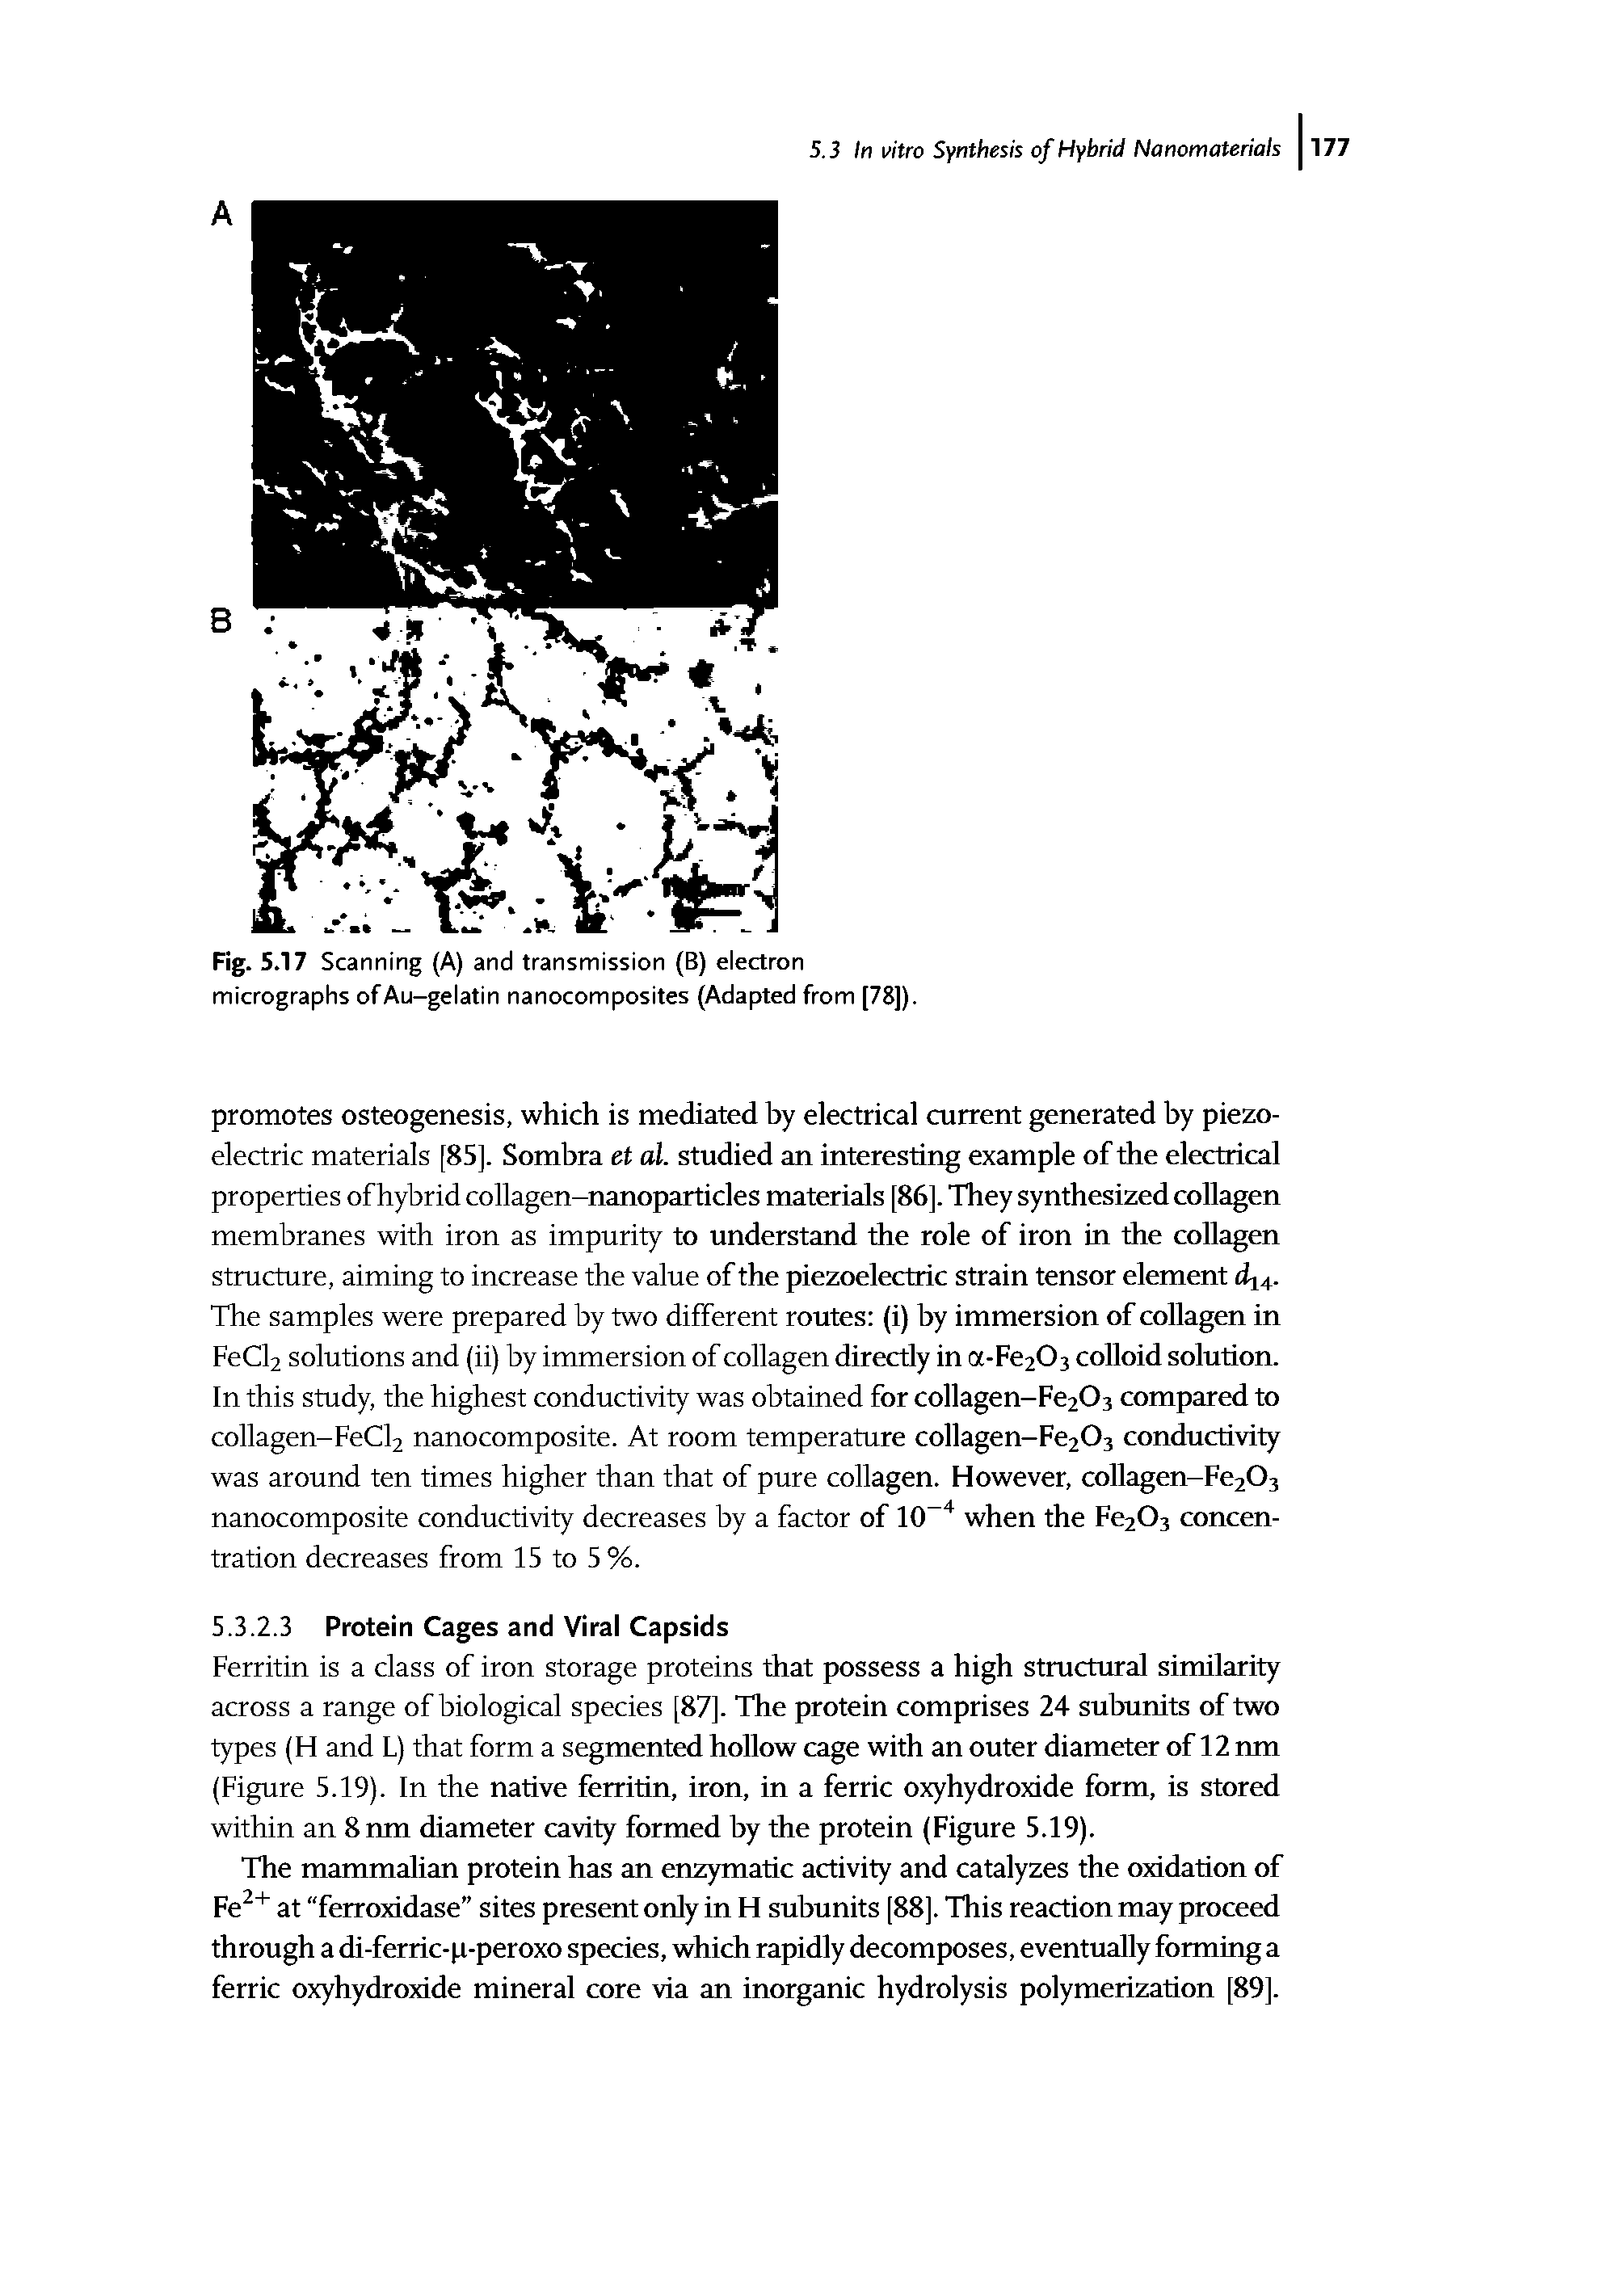 Fig. 5.17 Scanning (A) and transmission (B) electron micrographs of Au-gelatin nanocomposites (Adapted from [78]).